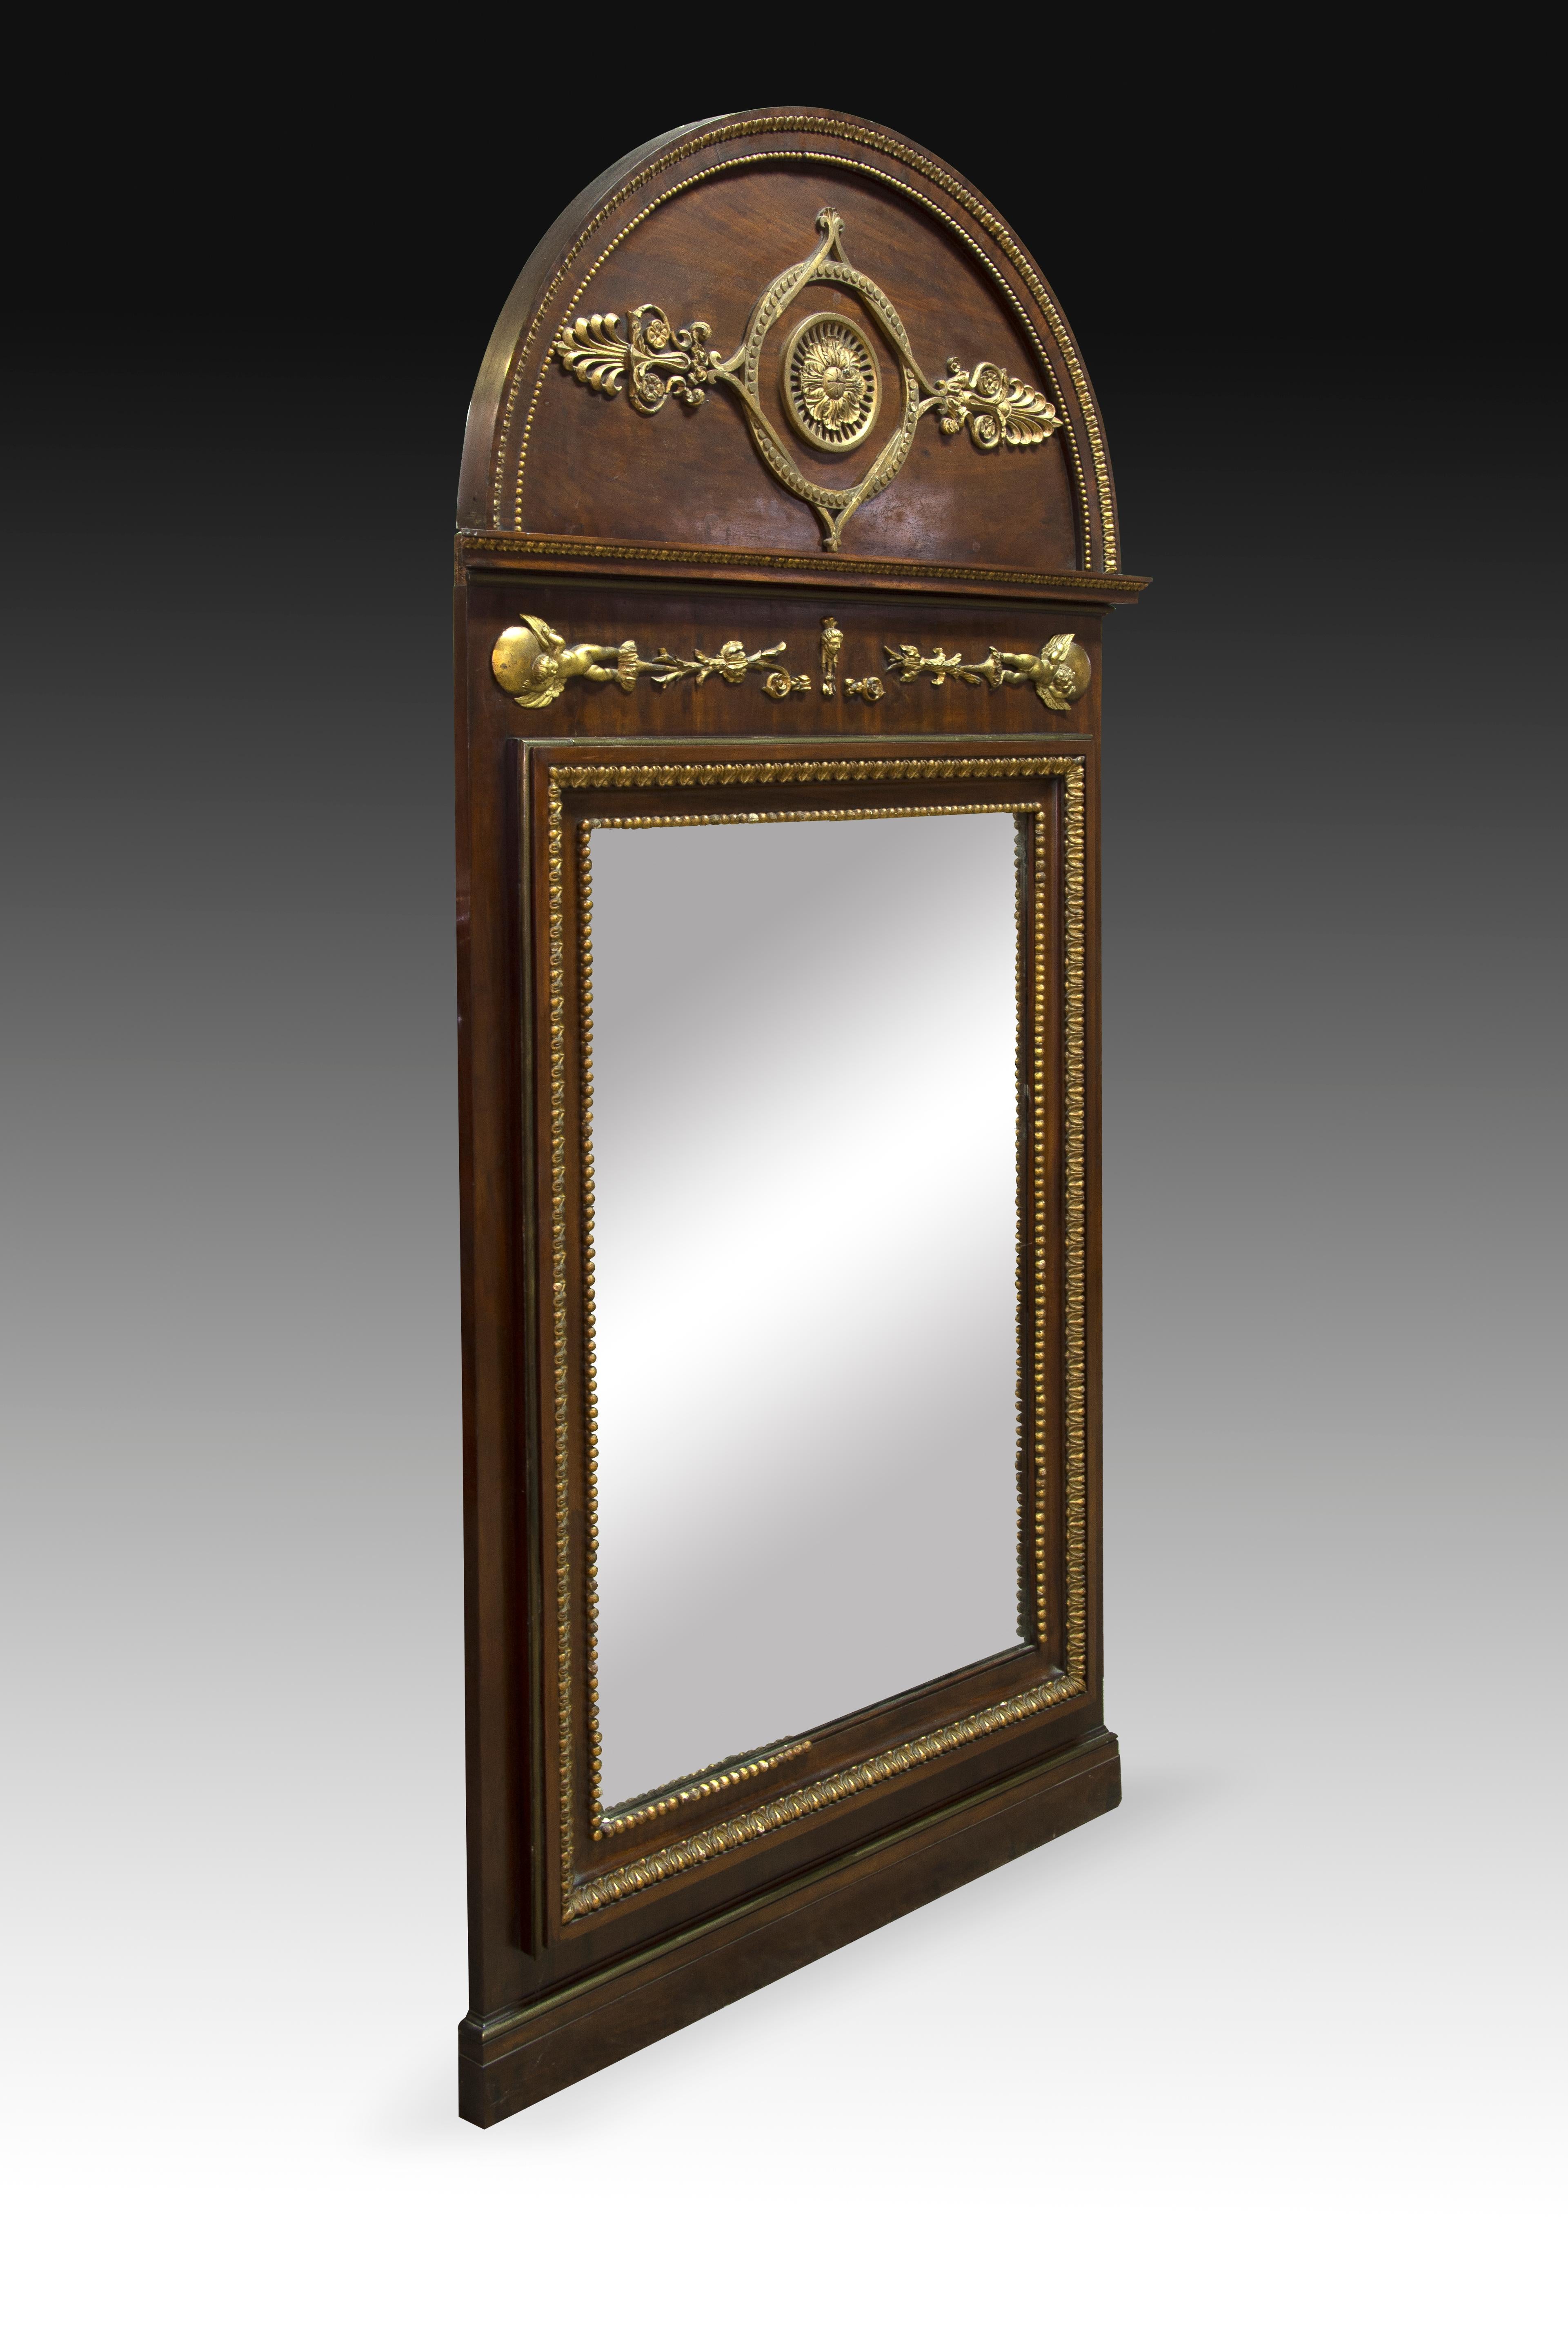 Mirror Fernando VII. Carved and gilded wood, glass. Towards the beginning of the 19th century.
Rectangular mirror made of wood carved in its color, combining with decorations of strong classical influence of carved and gilded wood, recalling bronze